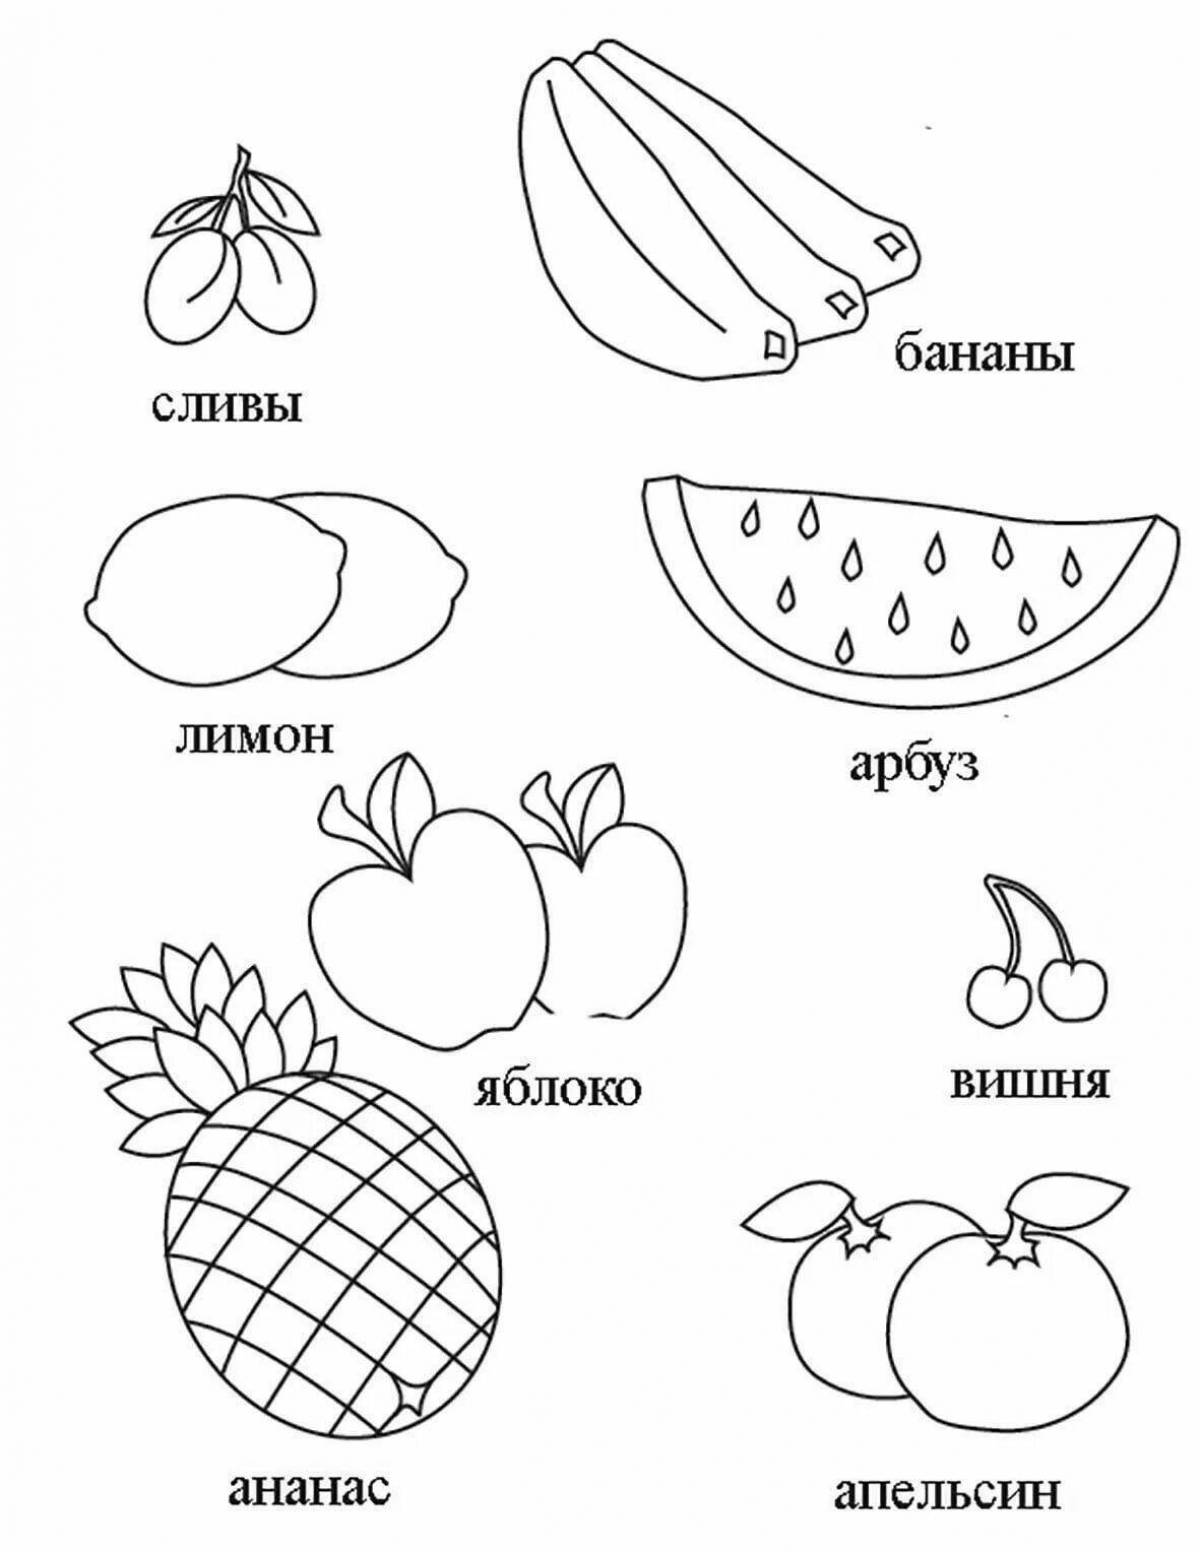 Amazing fruit coloring pages for kids